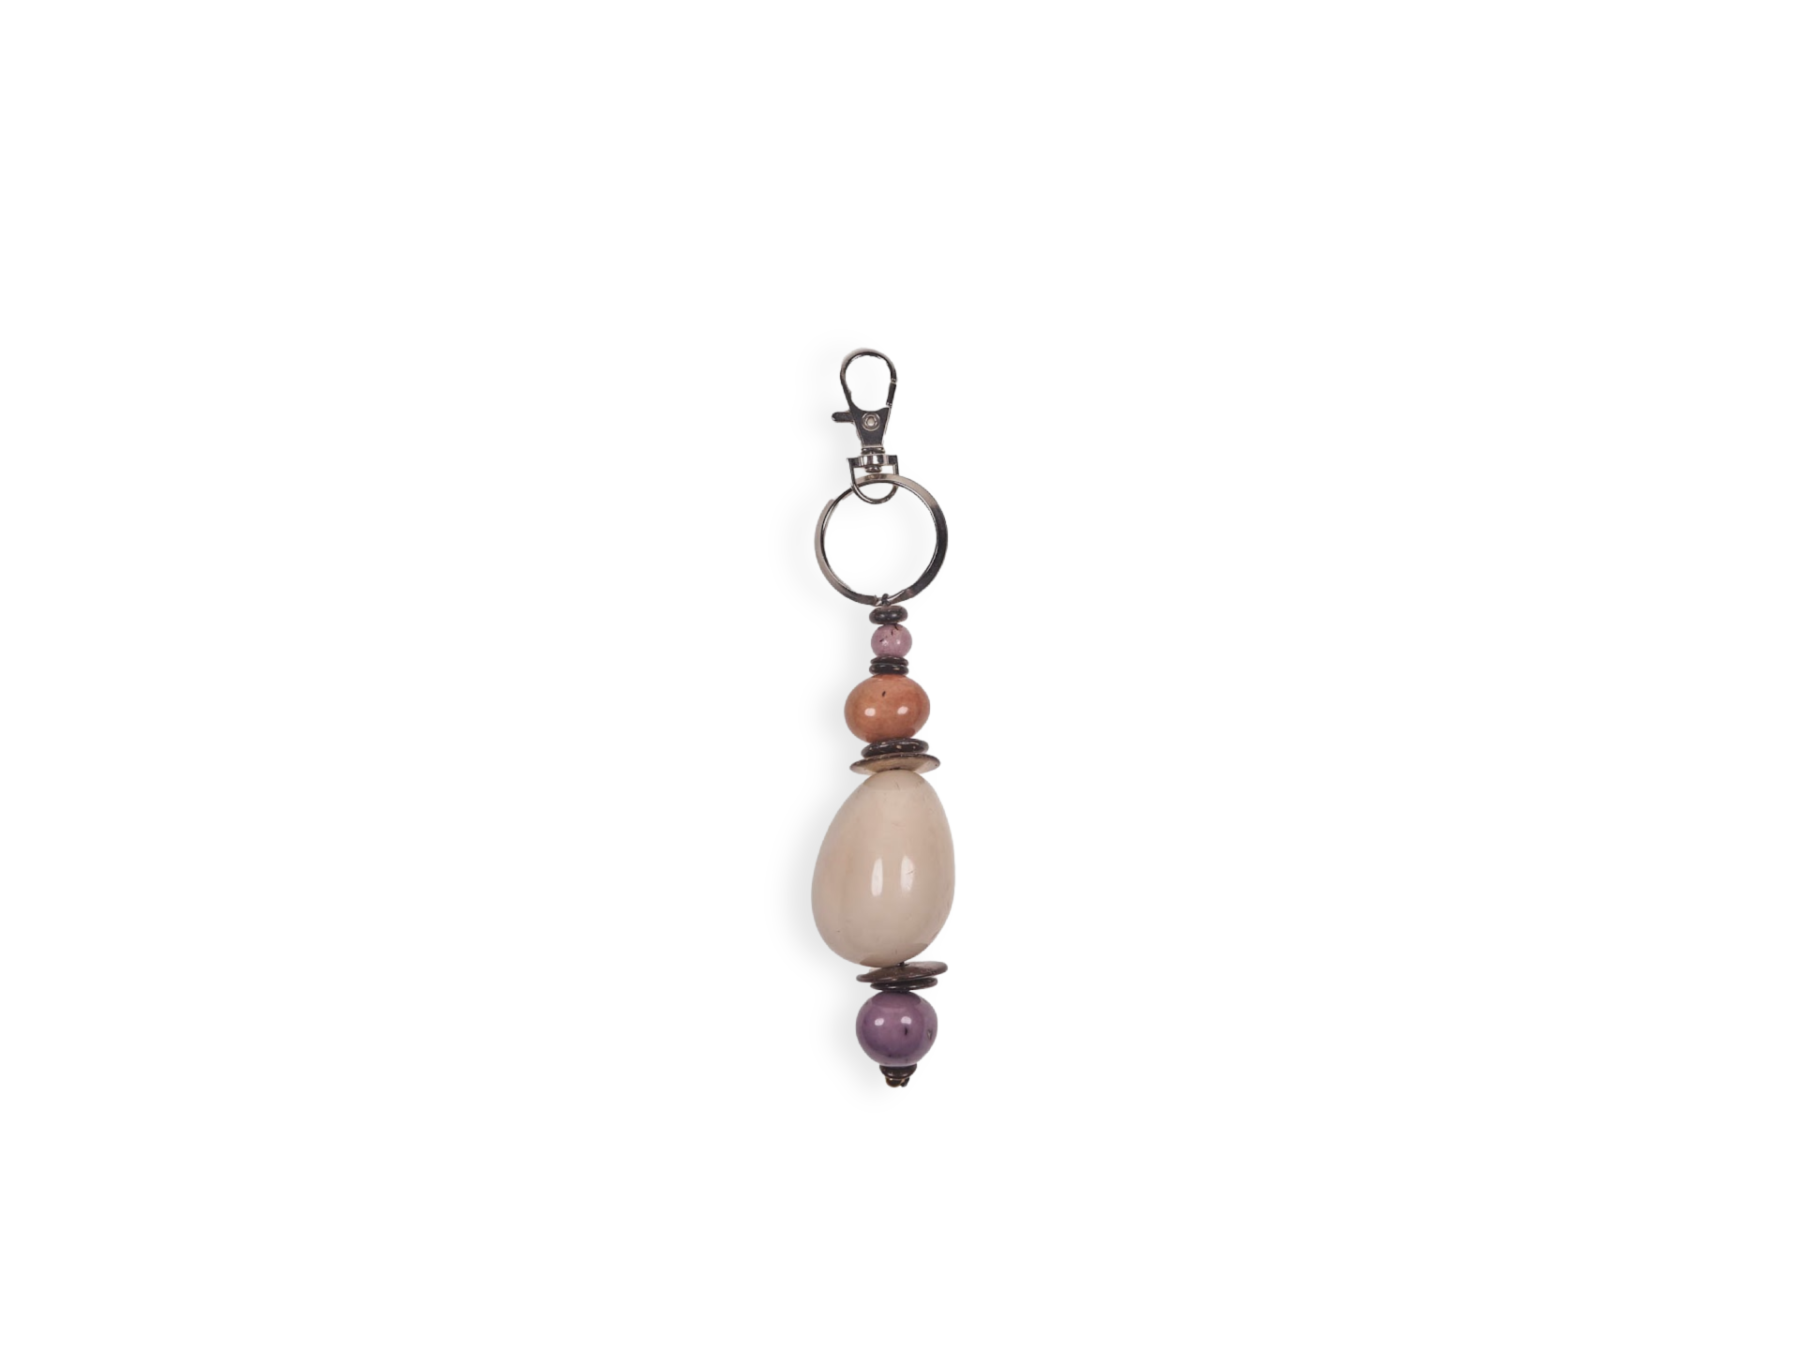 TOWER#17 LARGE TAGUA KEYCHAIN copy-3